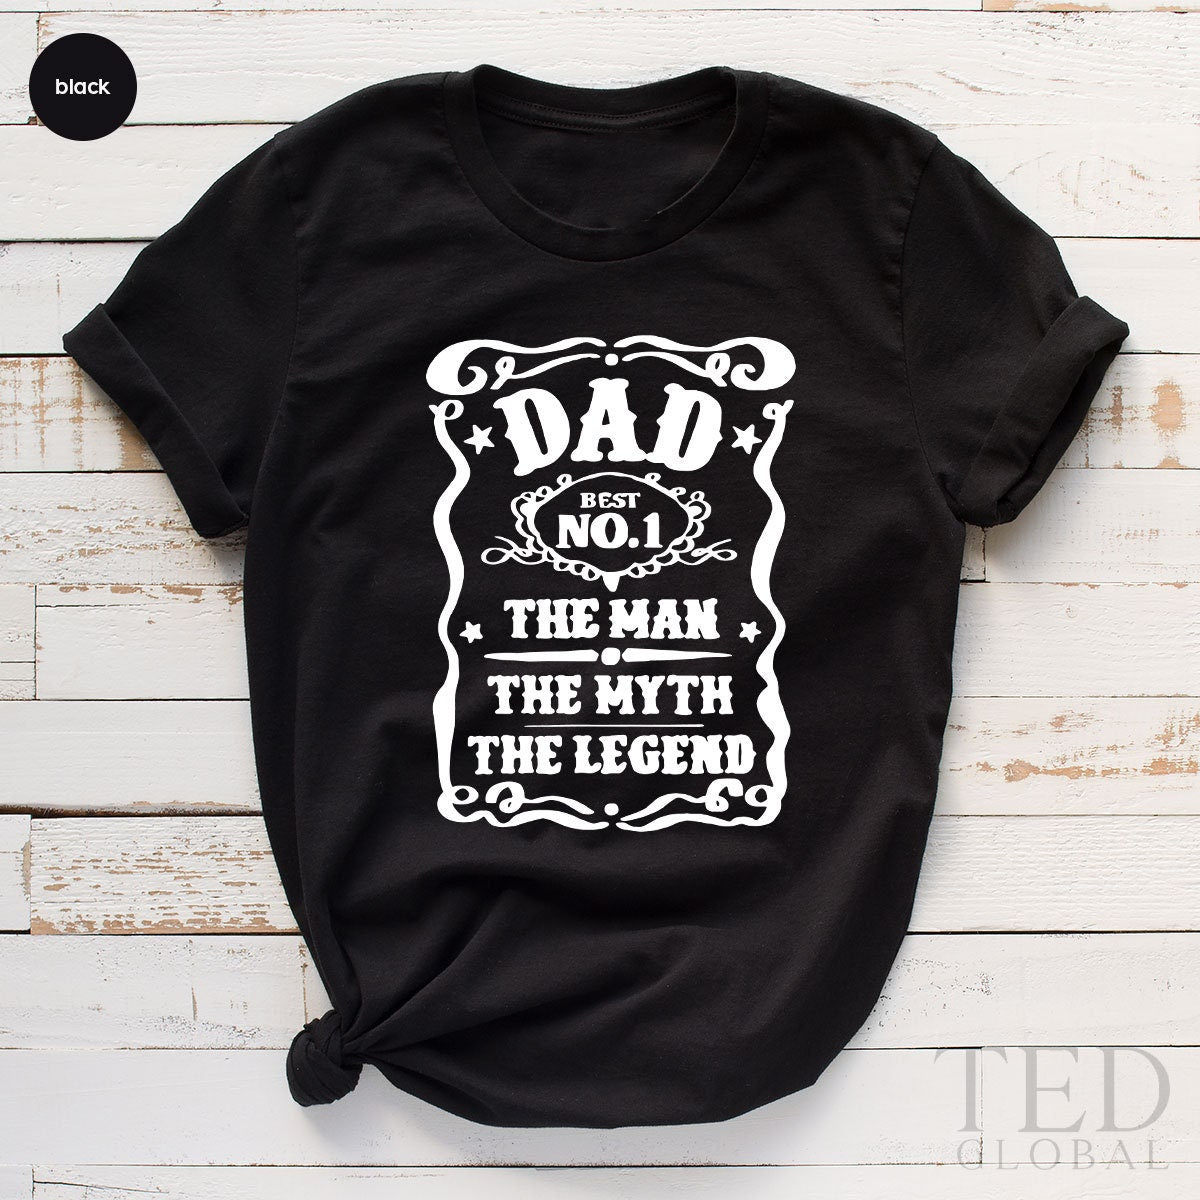 Dad and Baby Matching Shirts,funny New Dad Shirt,fathers Day Gift,dad Jokes  Shirt,father Son Daughter Outfit,new Dad Gift,gift for Husband 